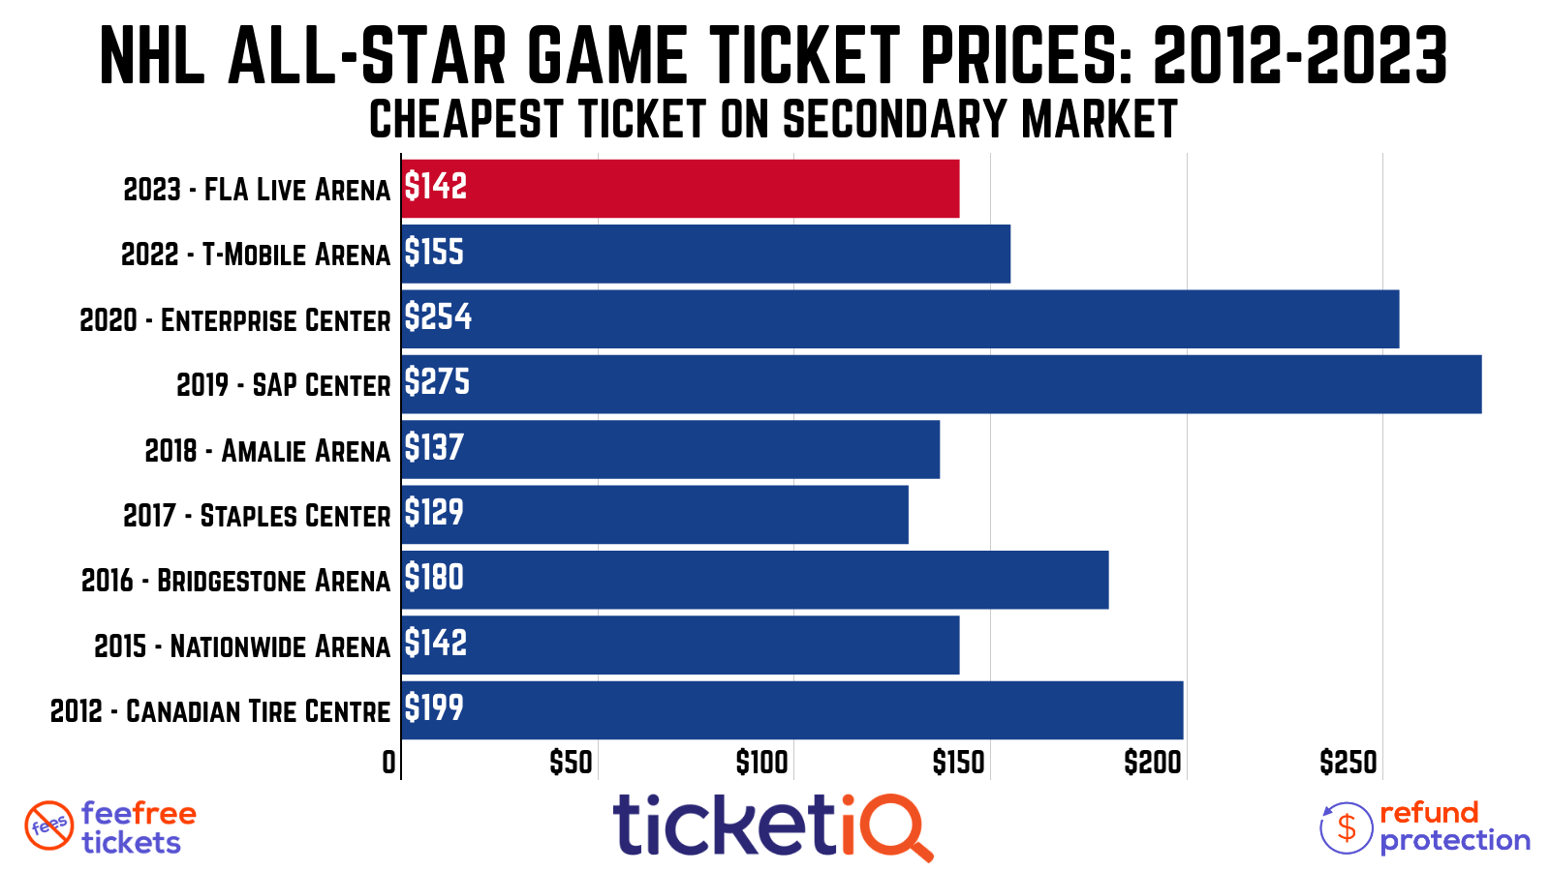 How To Find The Cheapest 2023 NHL AllStar Game Tickets